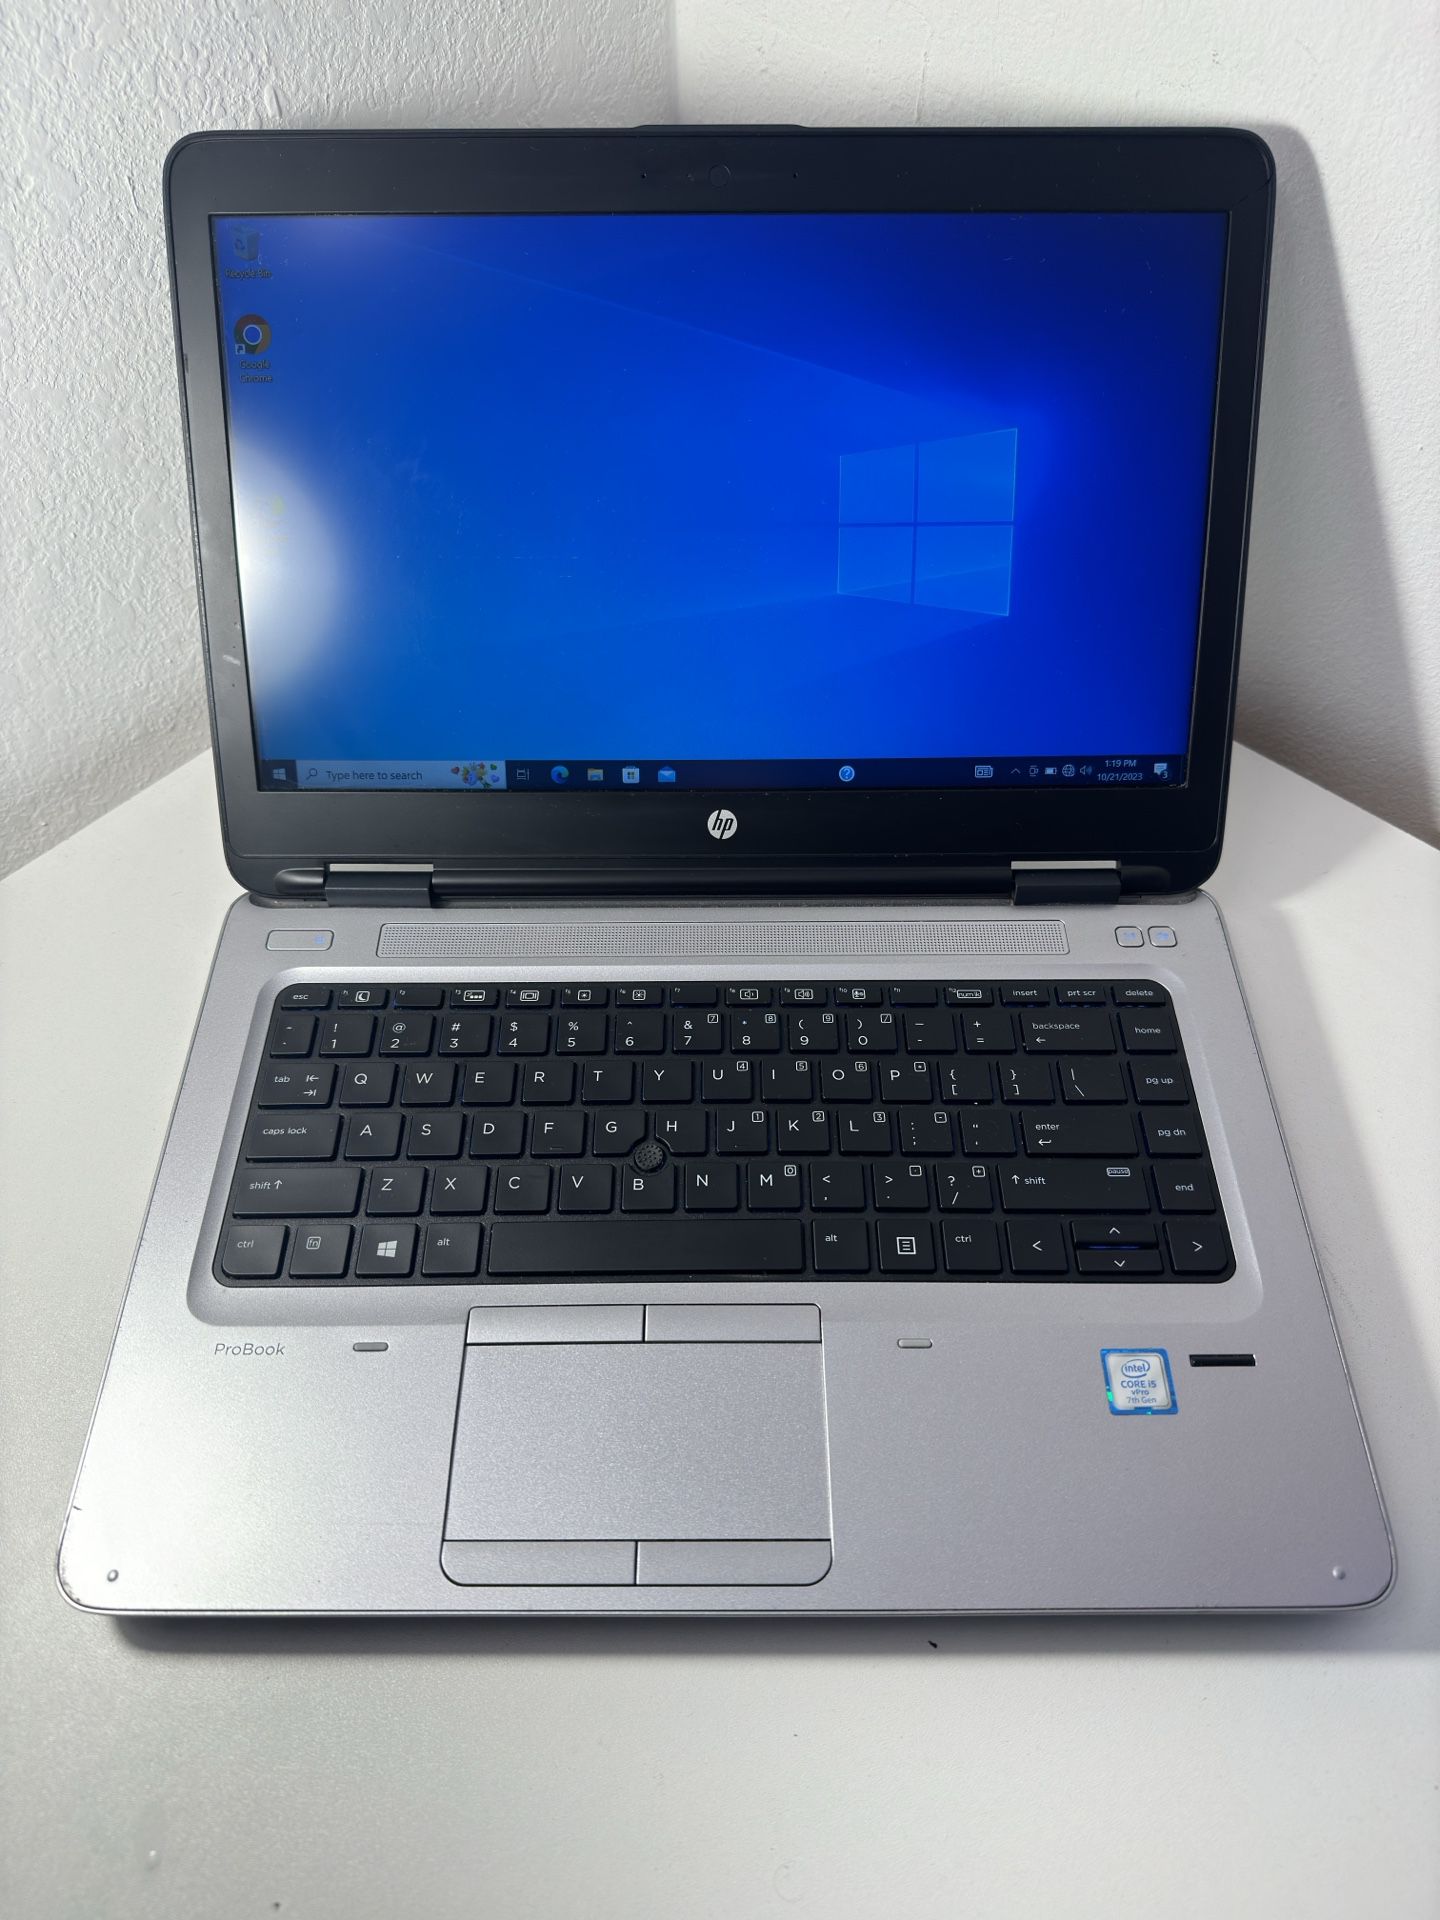 Laptop HP Probook 640 G3 8GB RAM 256GB SSD M.2 with Charger